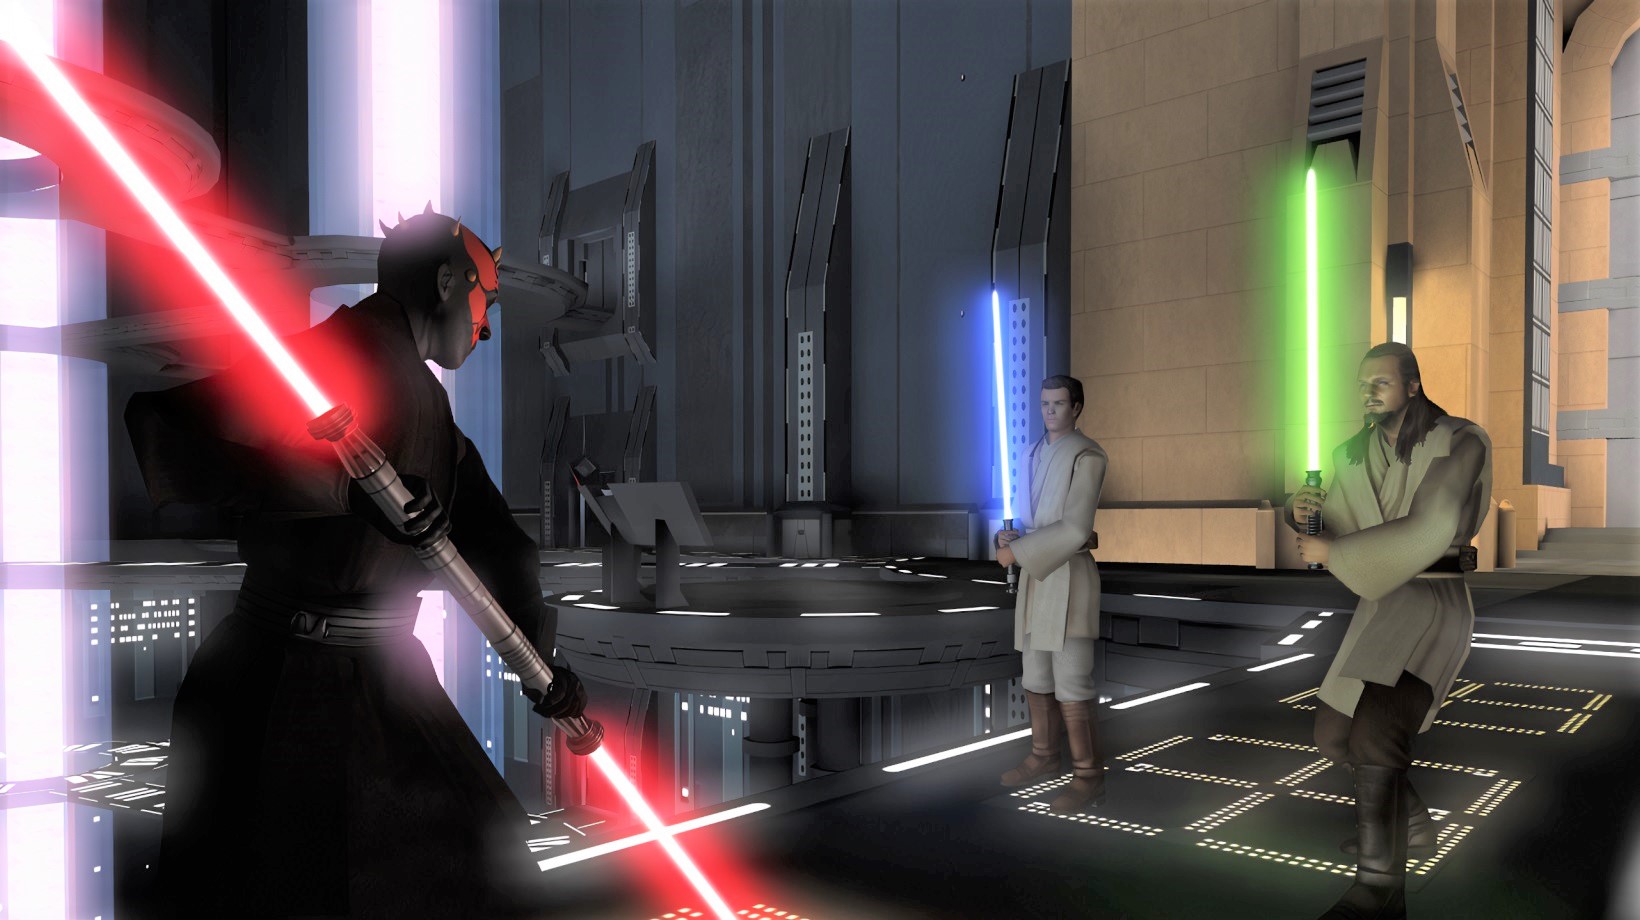  This mod for a 20-year-old Star Wars game recreates the series' iconic duels with its best lightsaber combat 